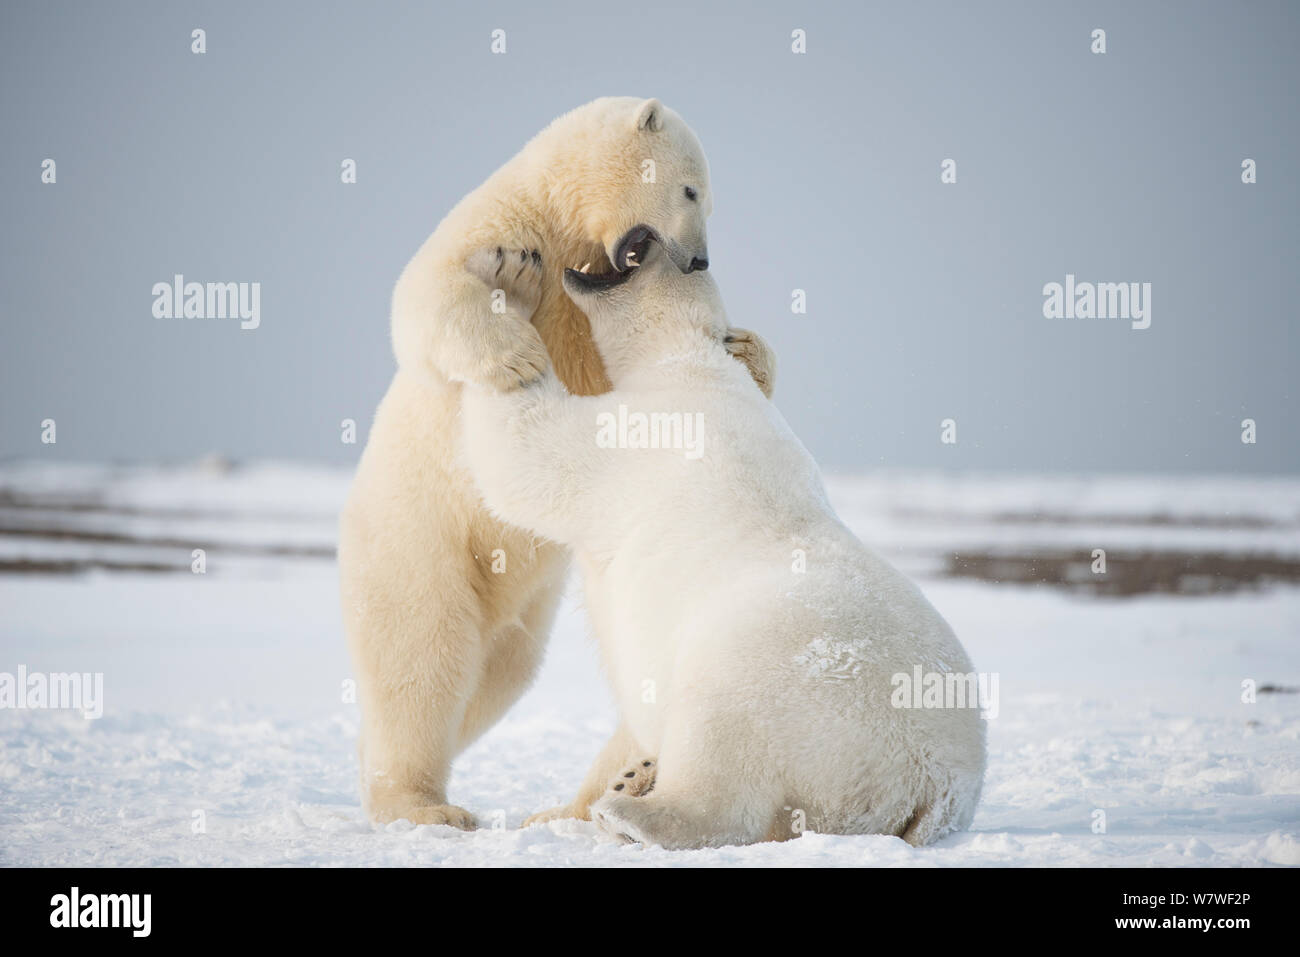 Polar bear (Ursus maritimus) pair of young bears playing with one another on newly formed pack ice during autumn freeze up, along the eastern Arctic coast of Alaska, Beaufort Sea, September Stock Photo